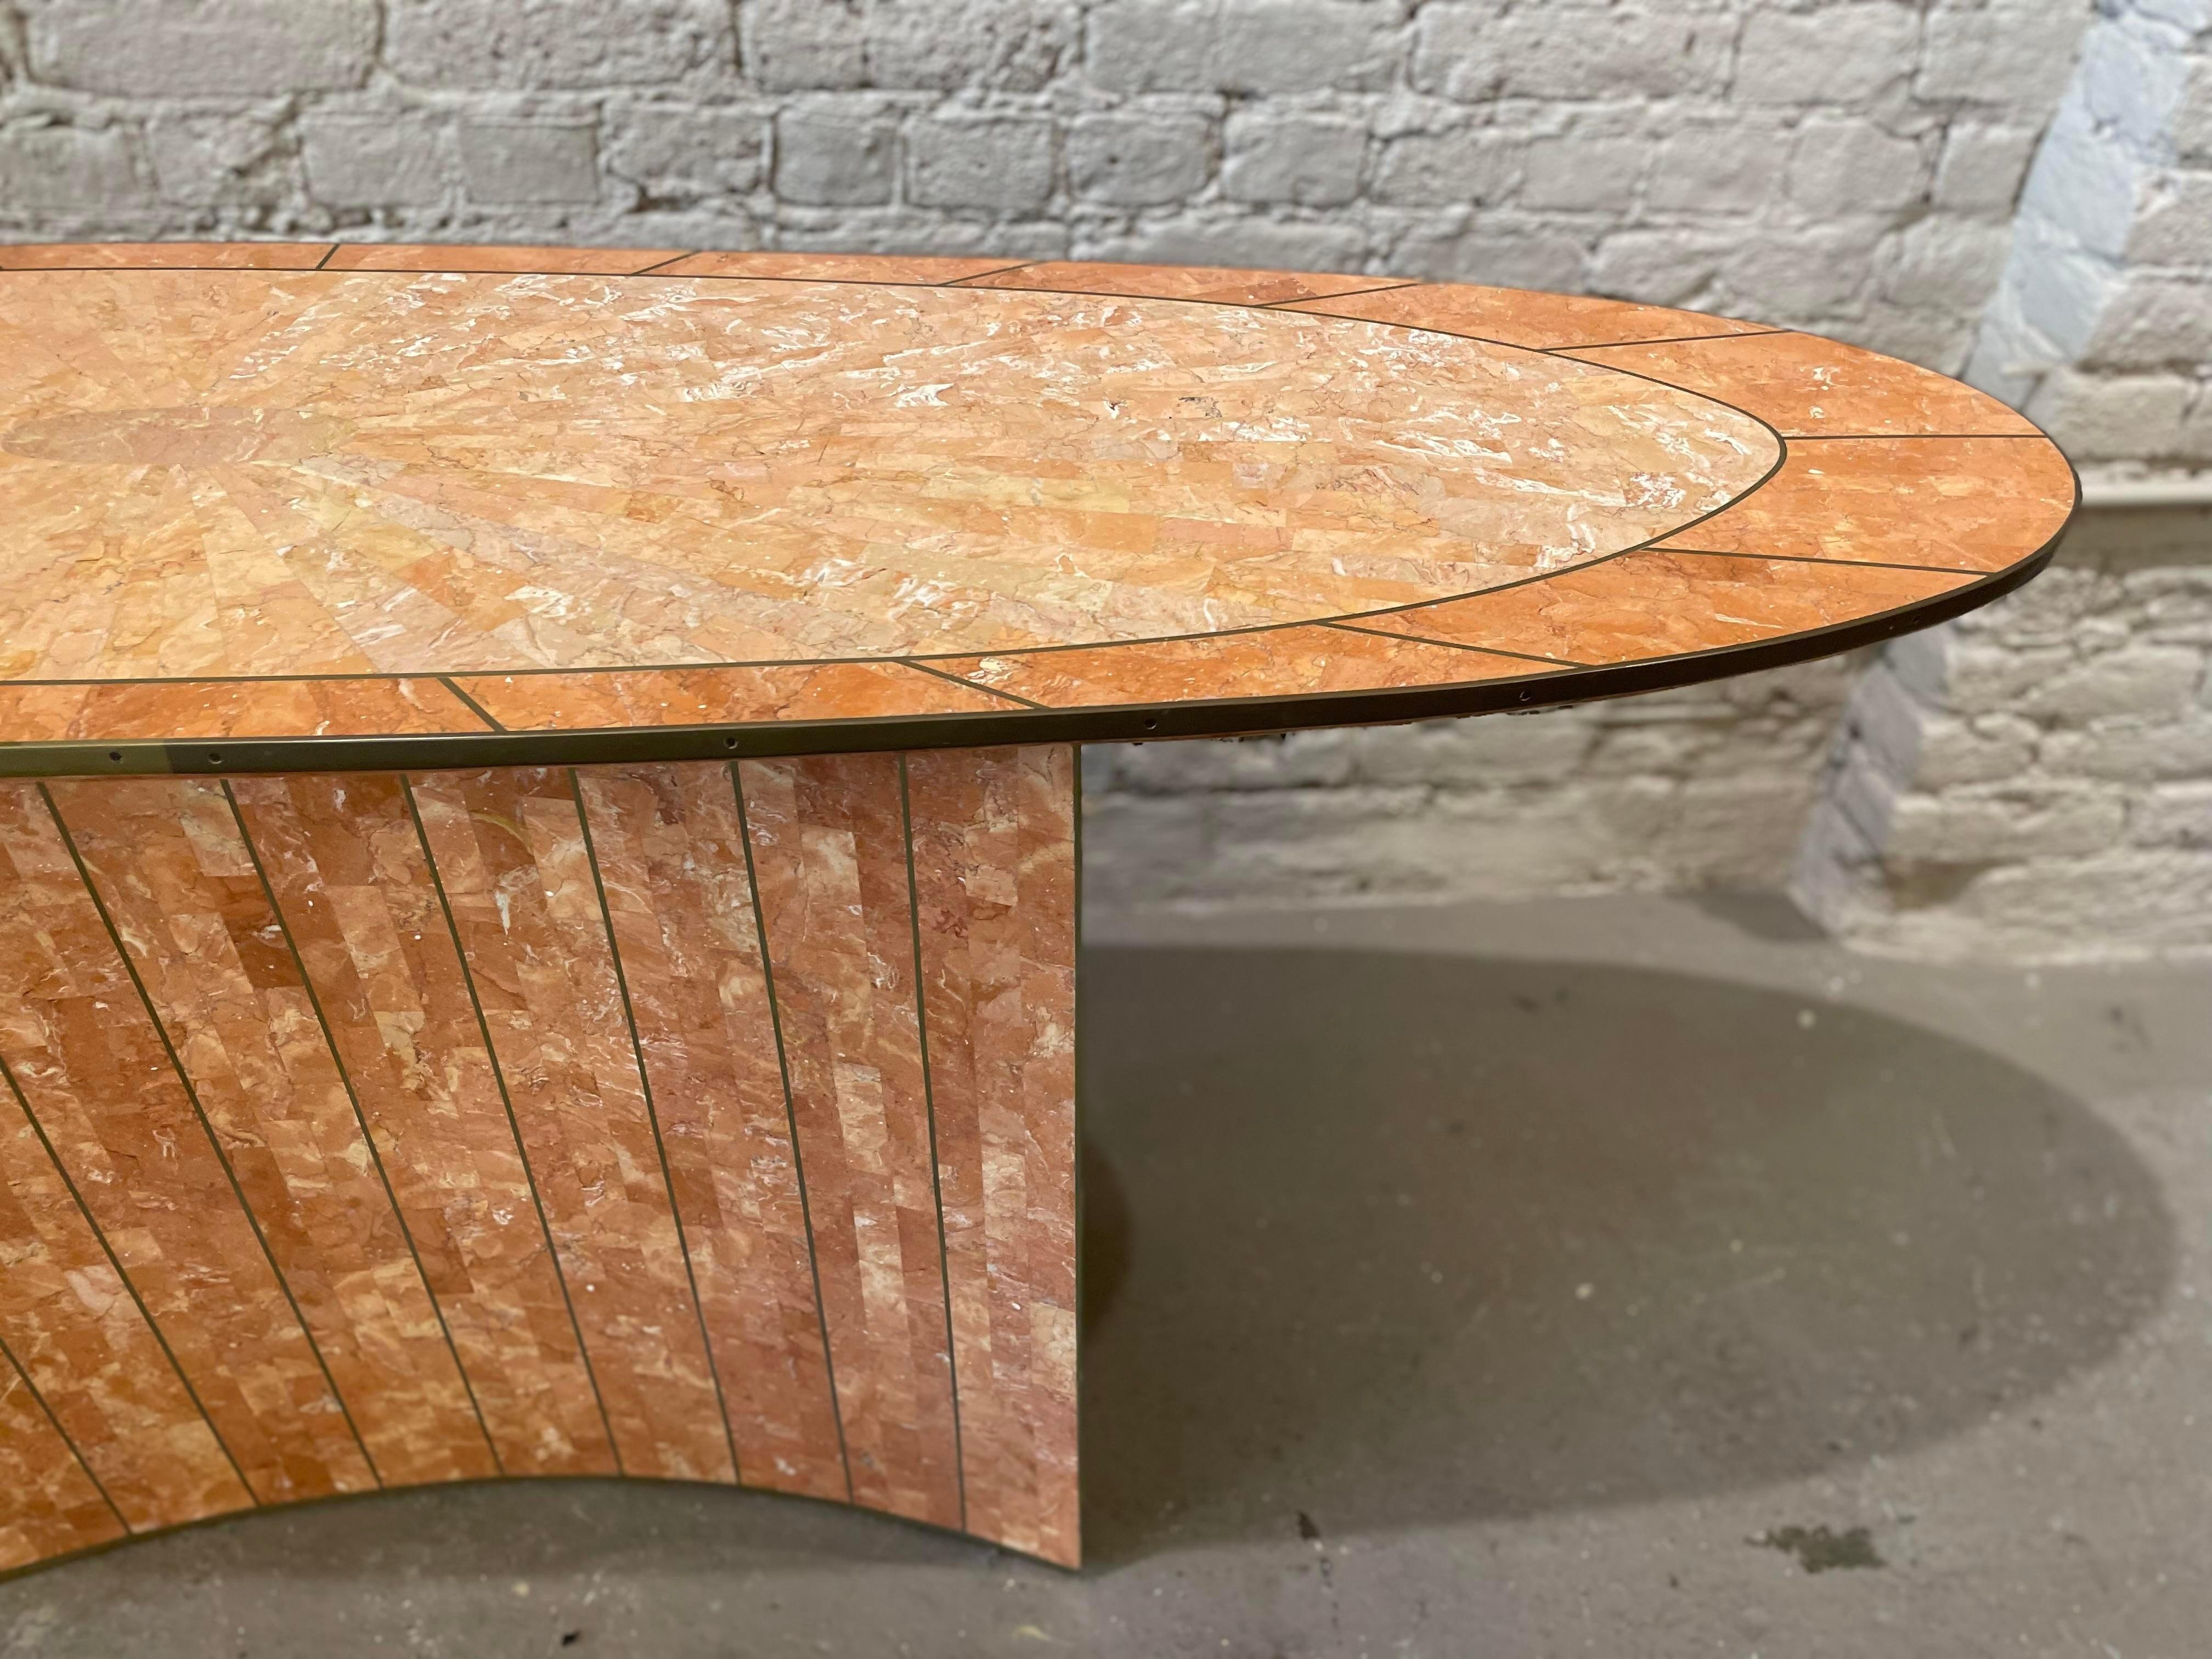 Modern 1980s Vintage Maitland Smith Coral Sunburst Console Table With Brass Detailing For Sale